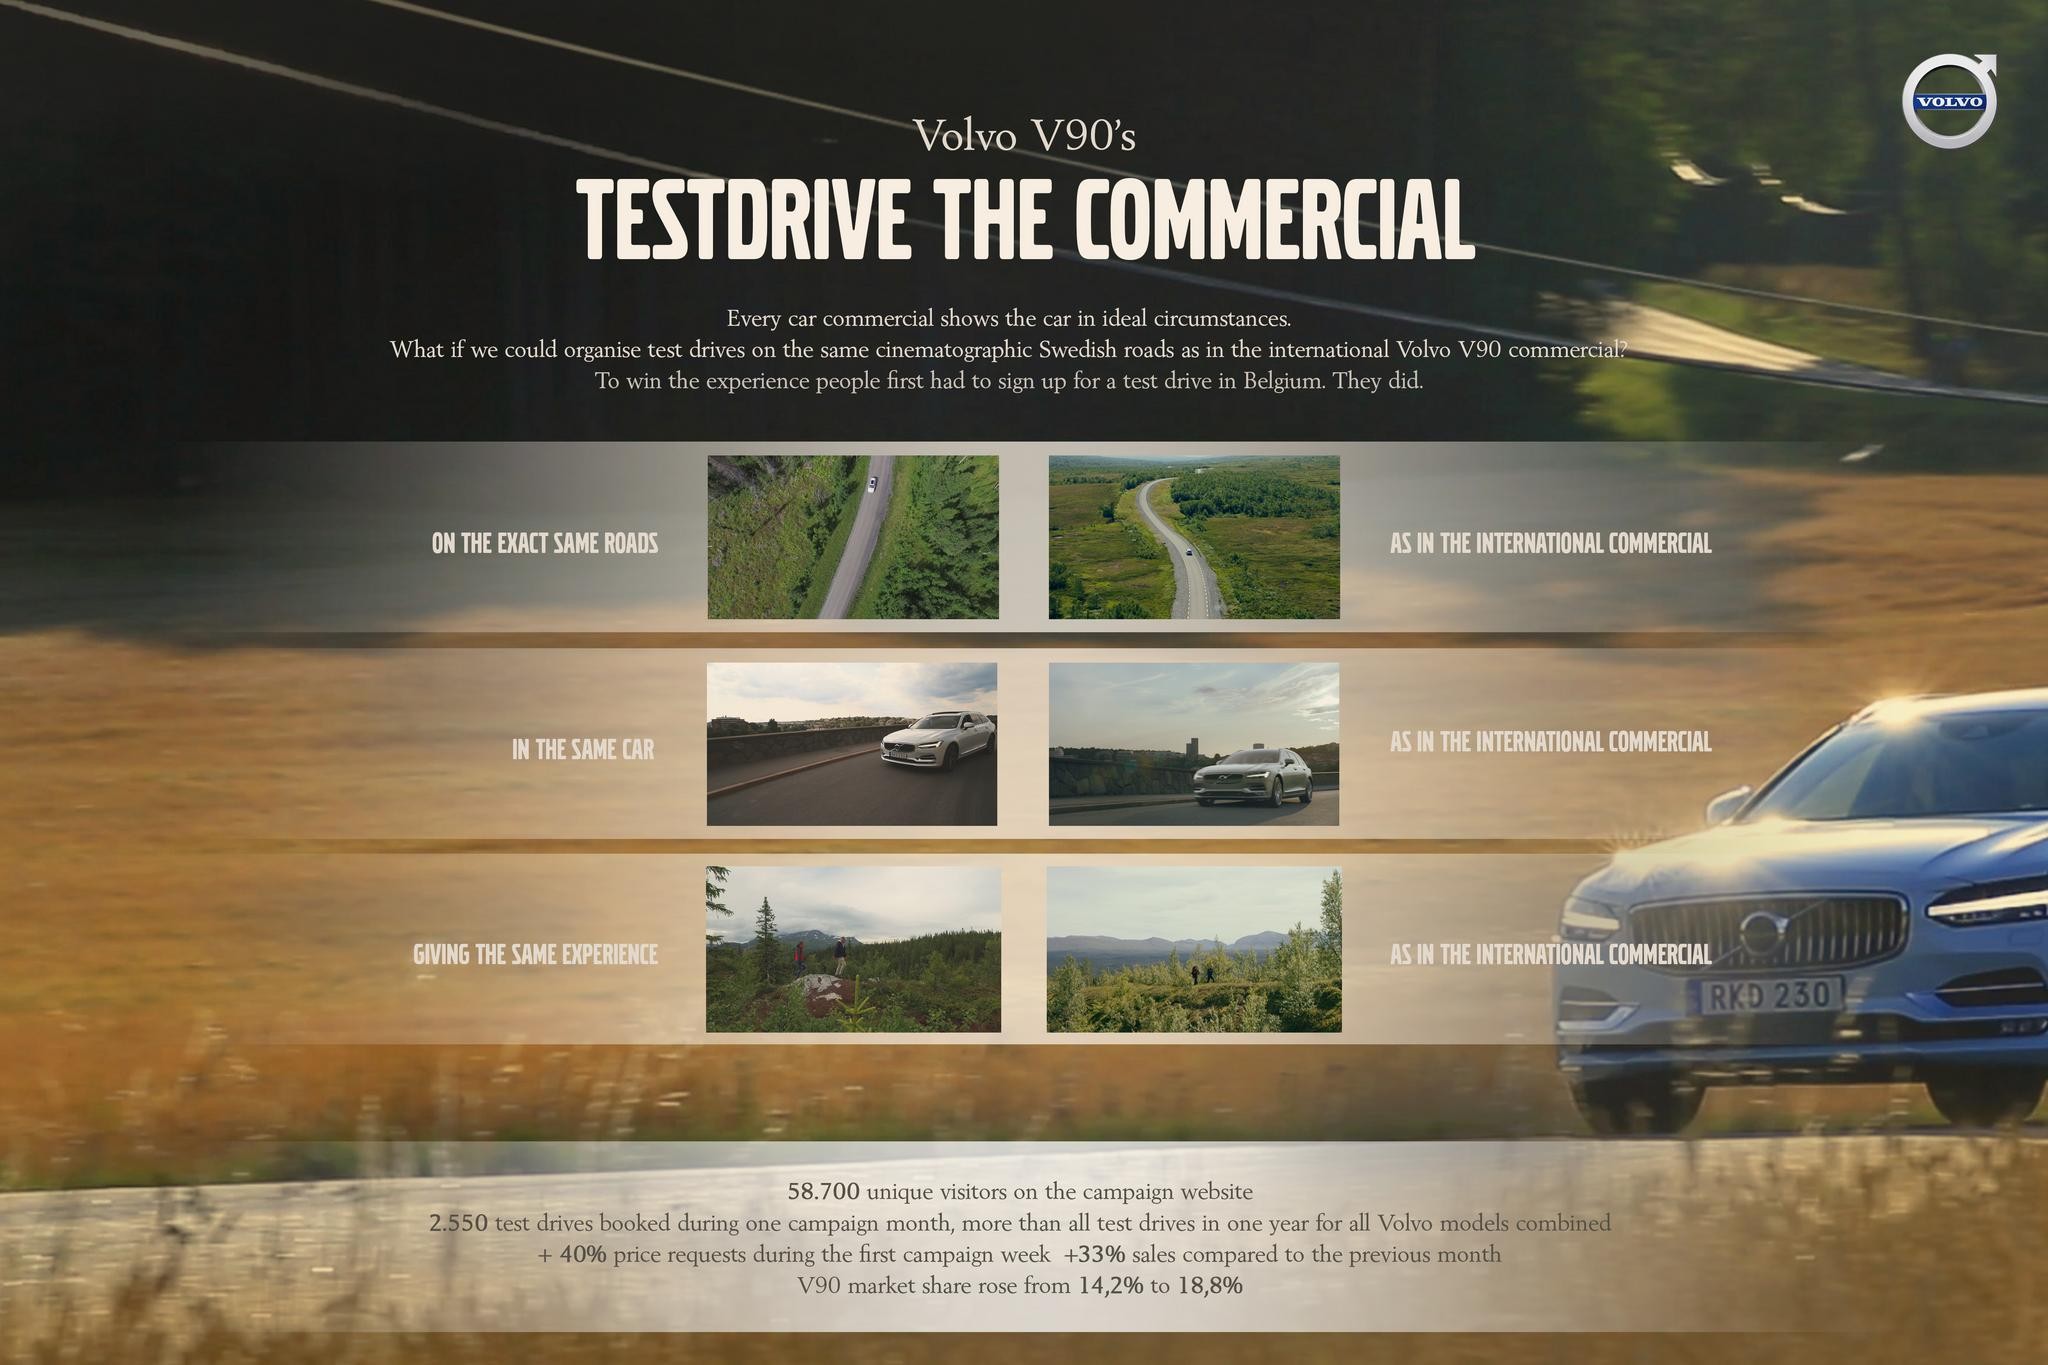 Testdrive the Commercial